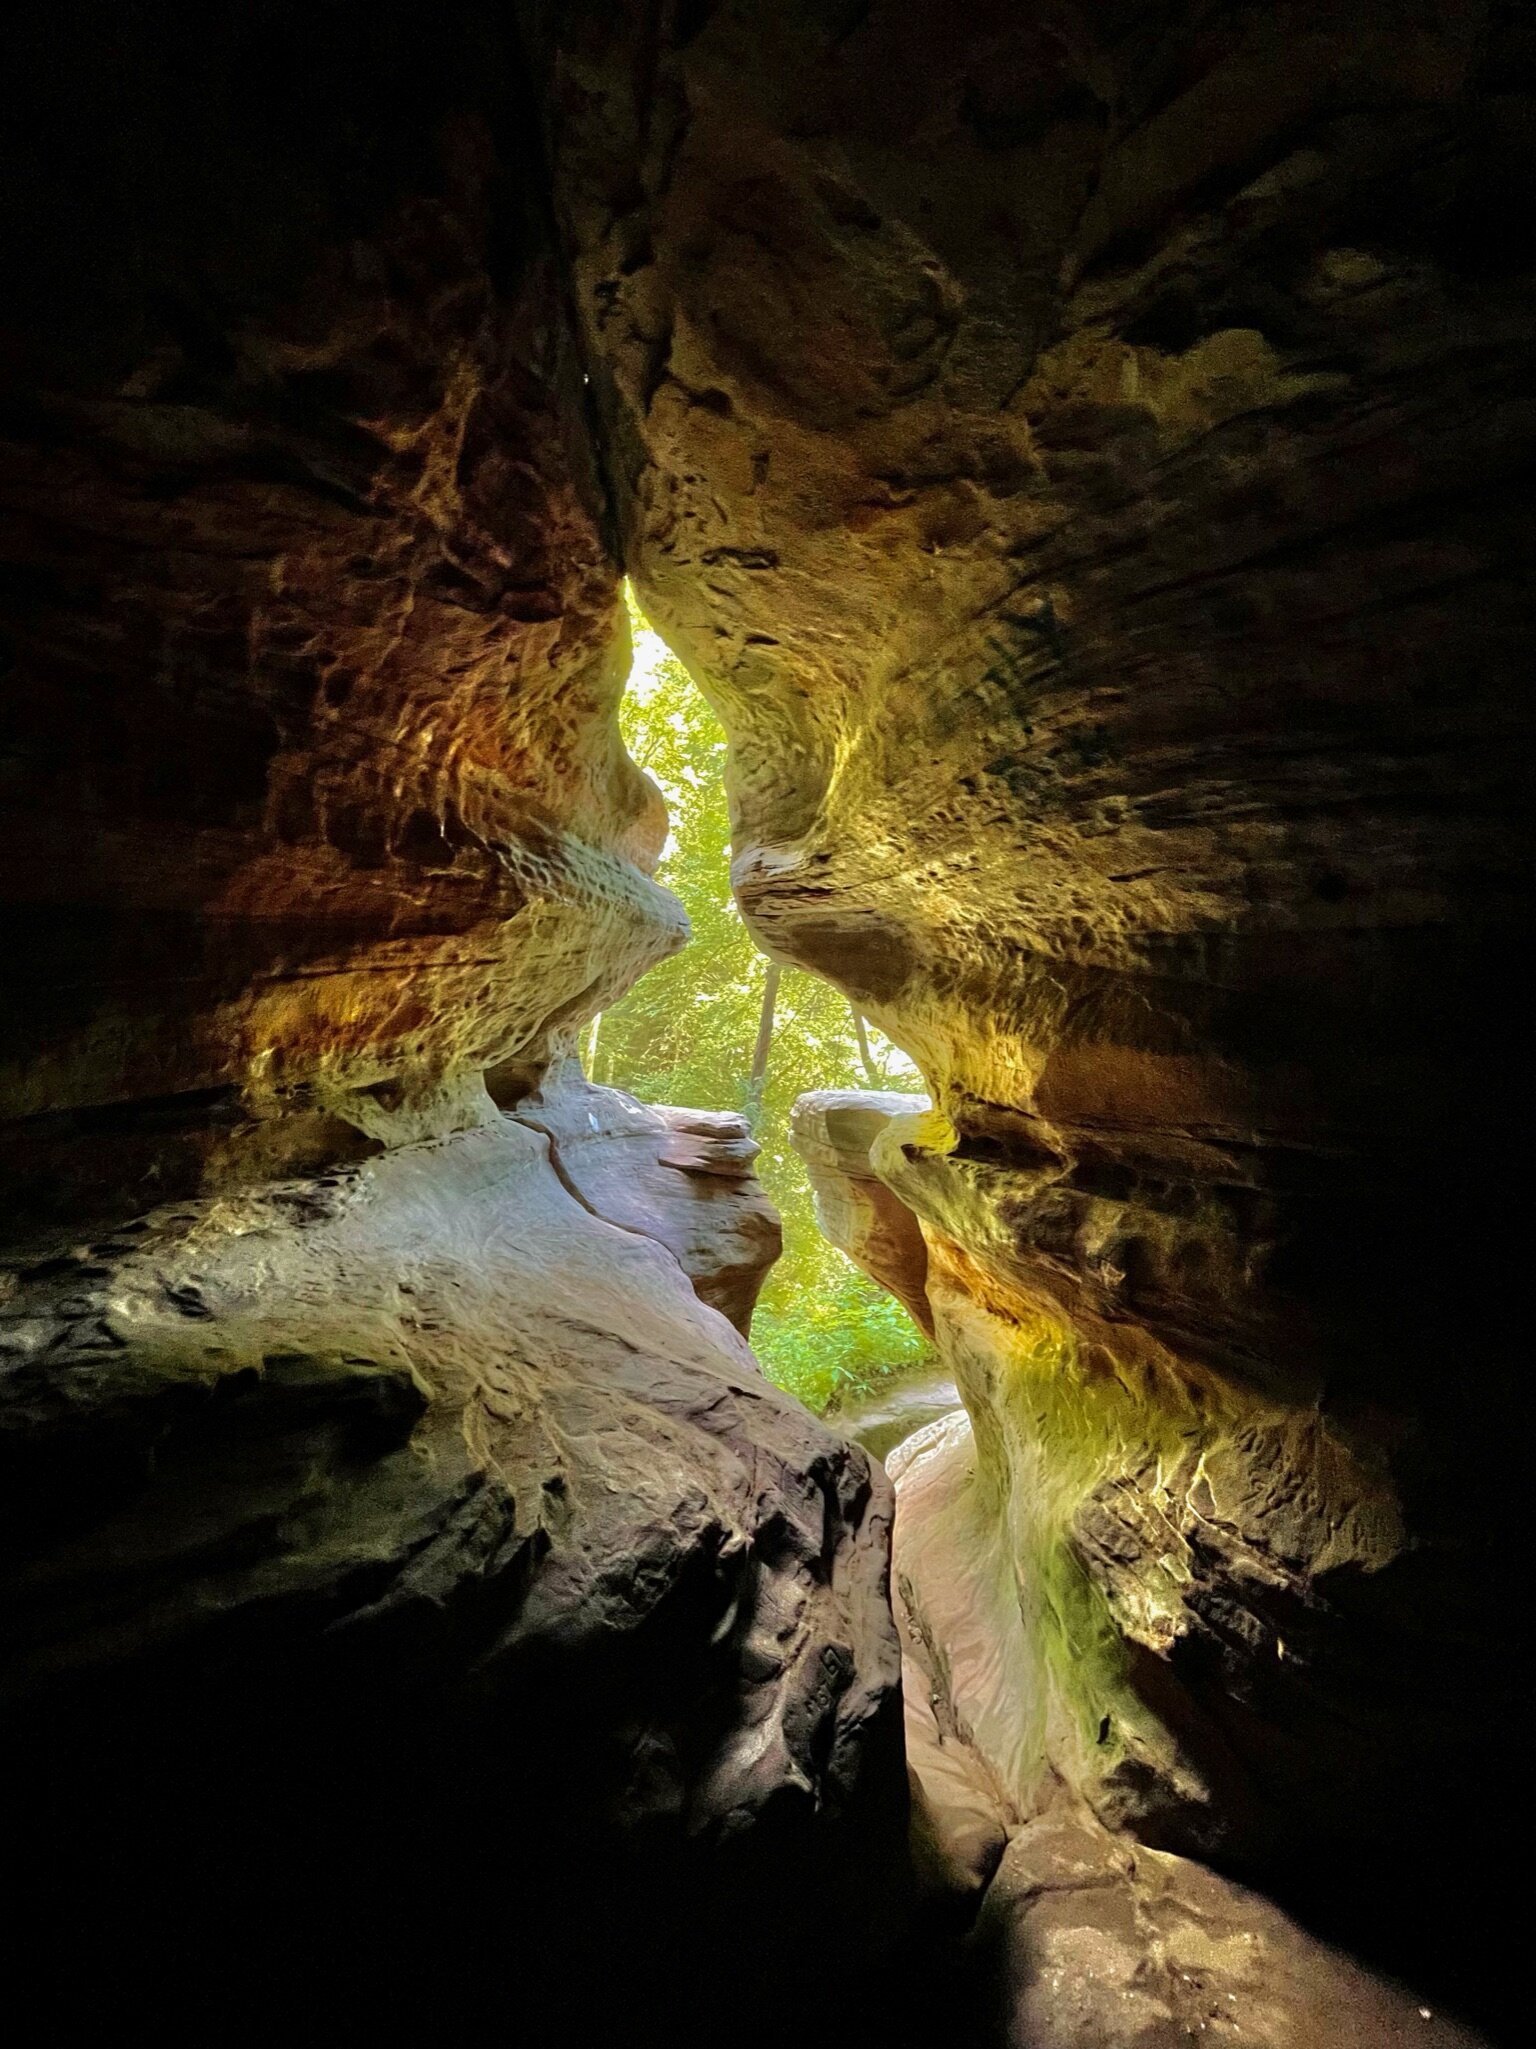  Hocking Hills south of Columbus, Ohio has miles of hiking trails and caves to explore.   